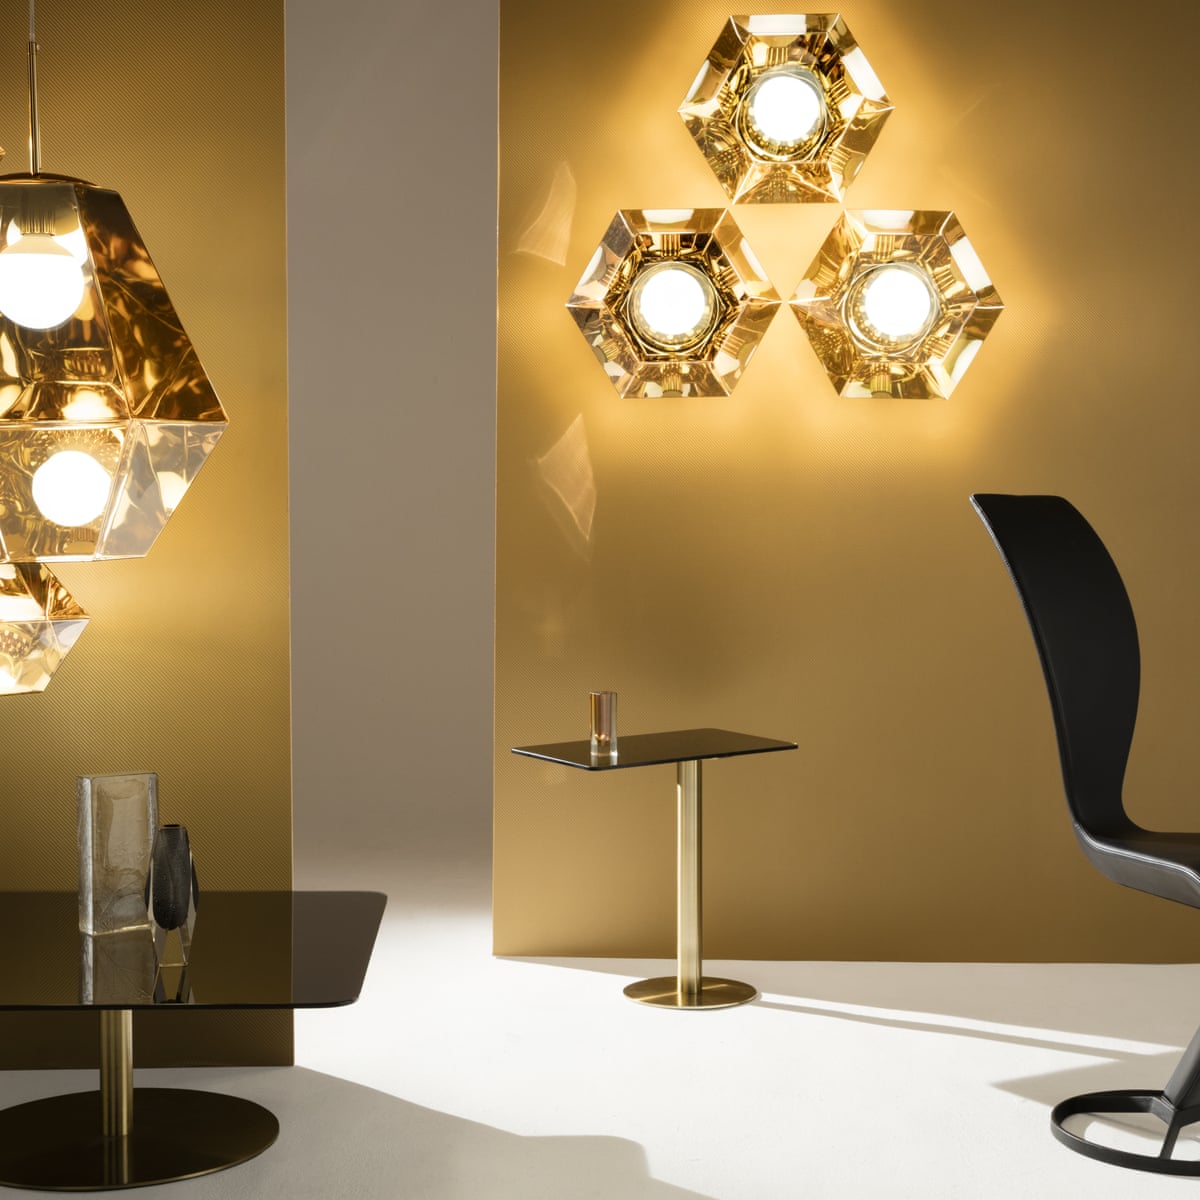 The bright stuff: a guide to interior lighting | Interiors | The Guardian